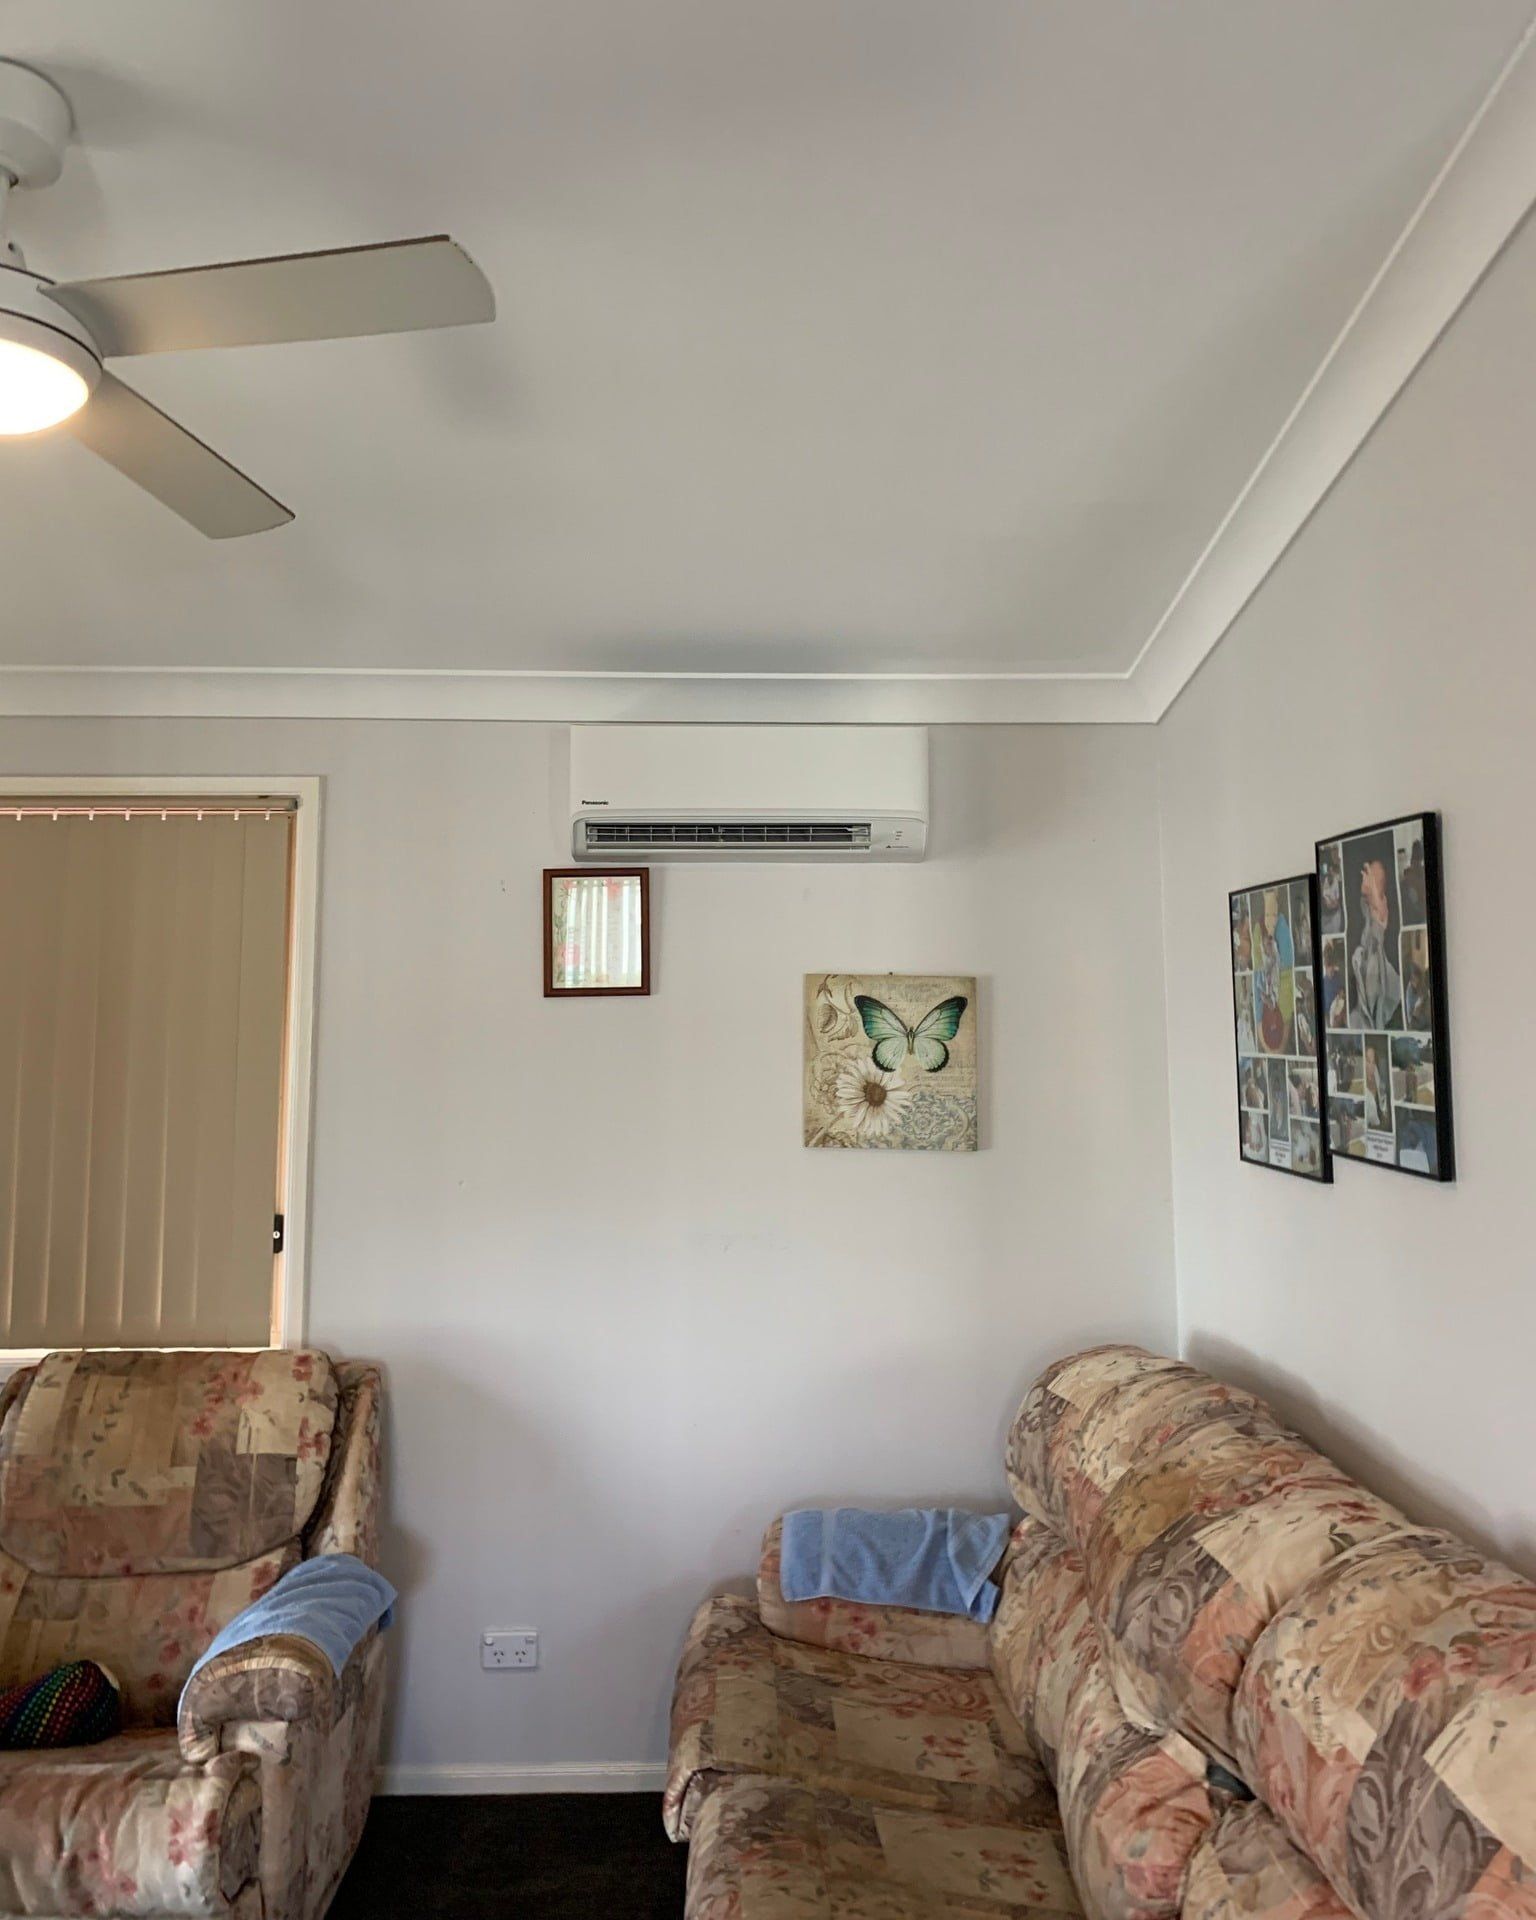 Panasonic Split System Installed In A Cozy Living Room — Air Conditioners in Illawarra, NSW